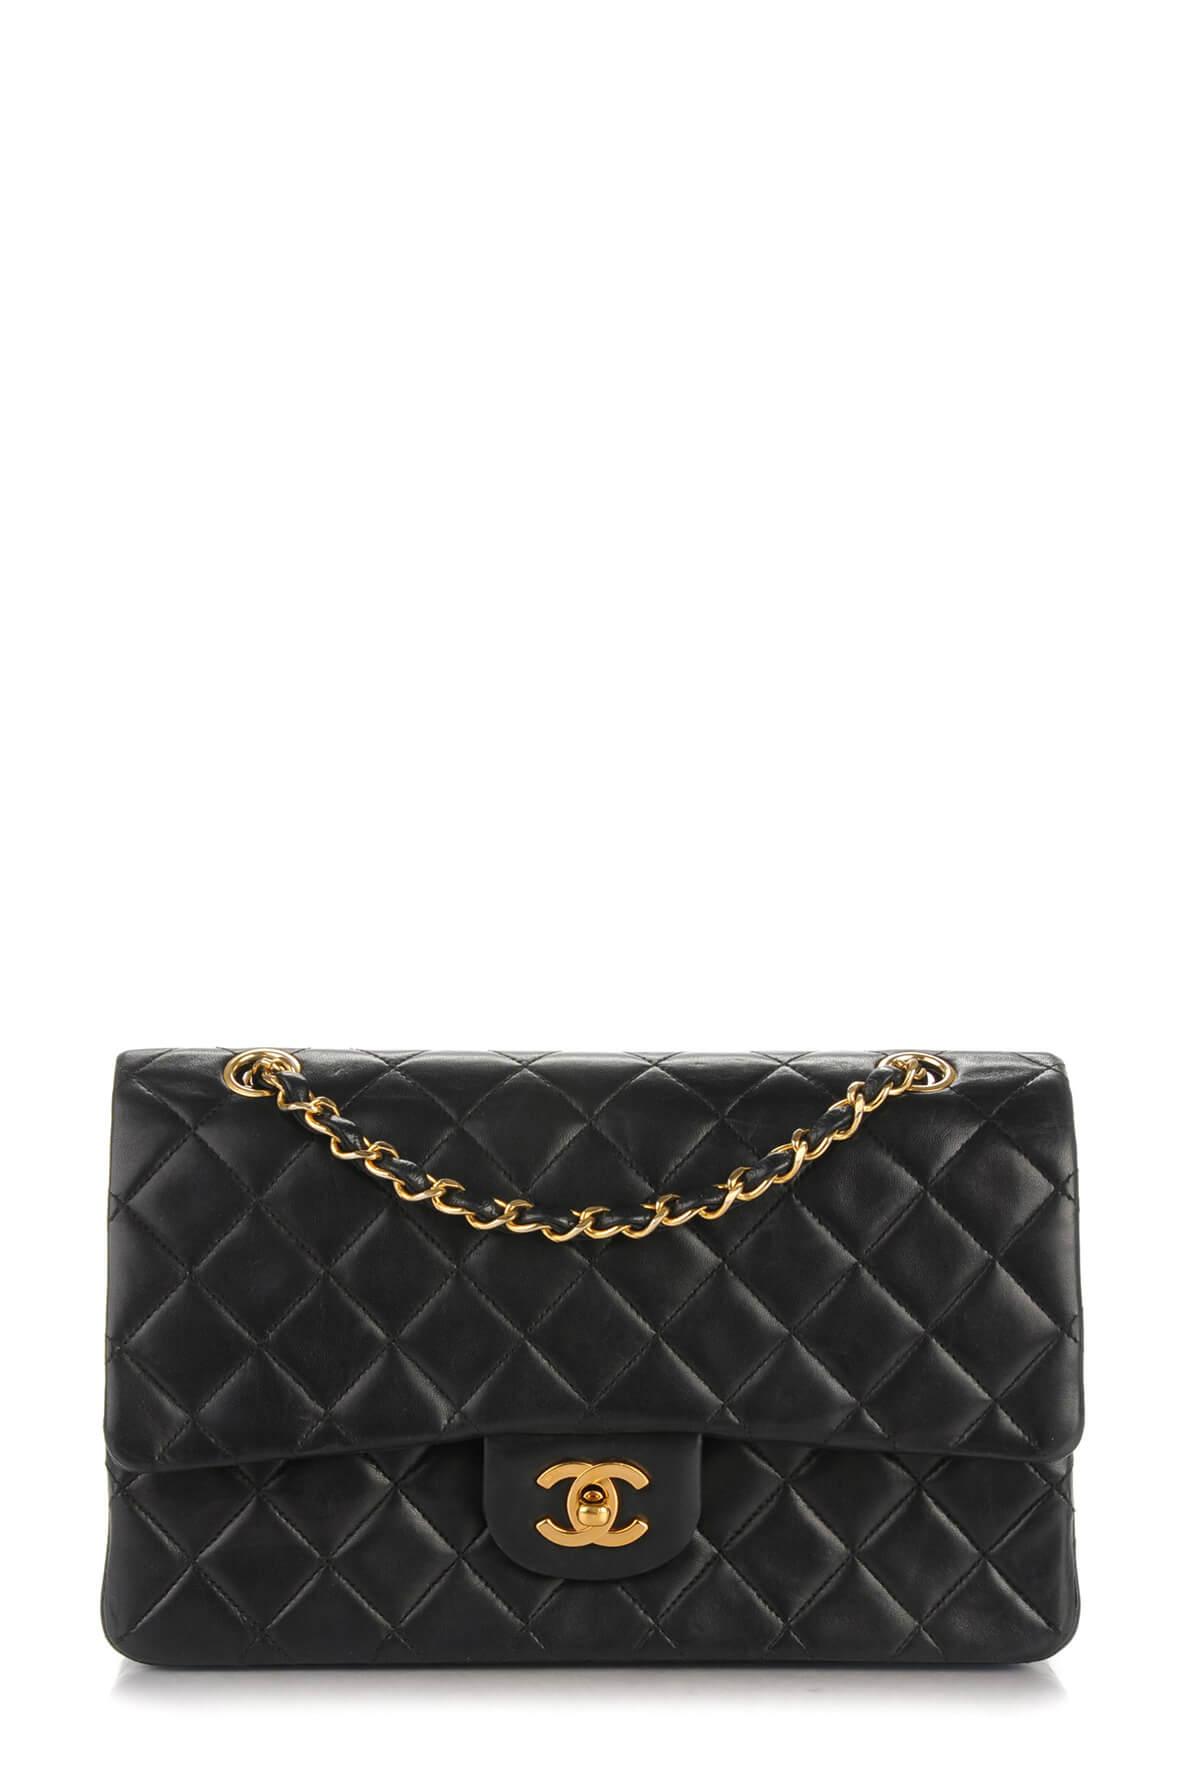 Quilted Lambskin Medium Classic Flap Bag Black with Gold Hardware – Style  Theory SG